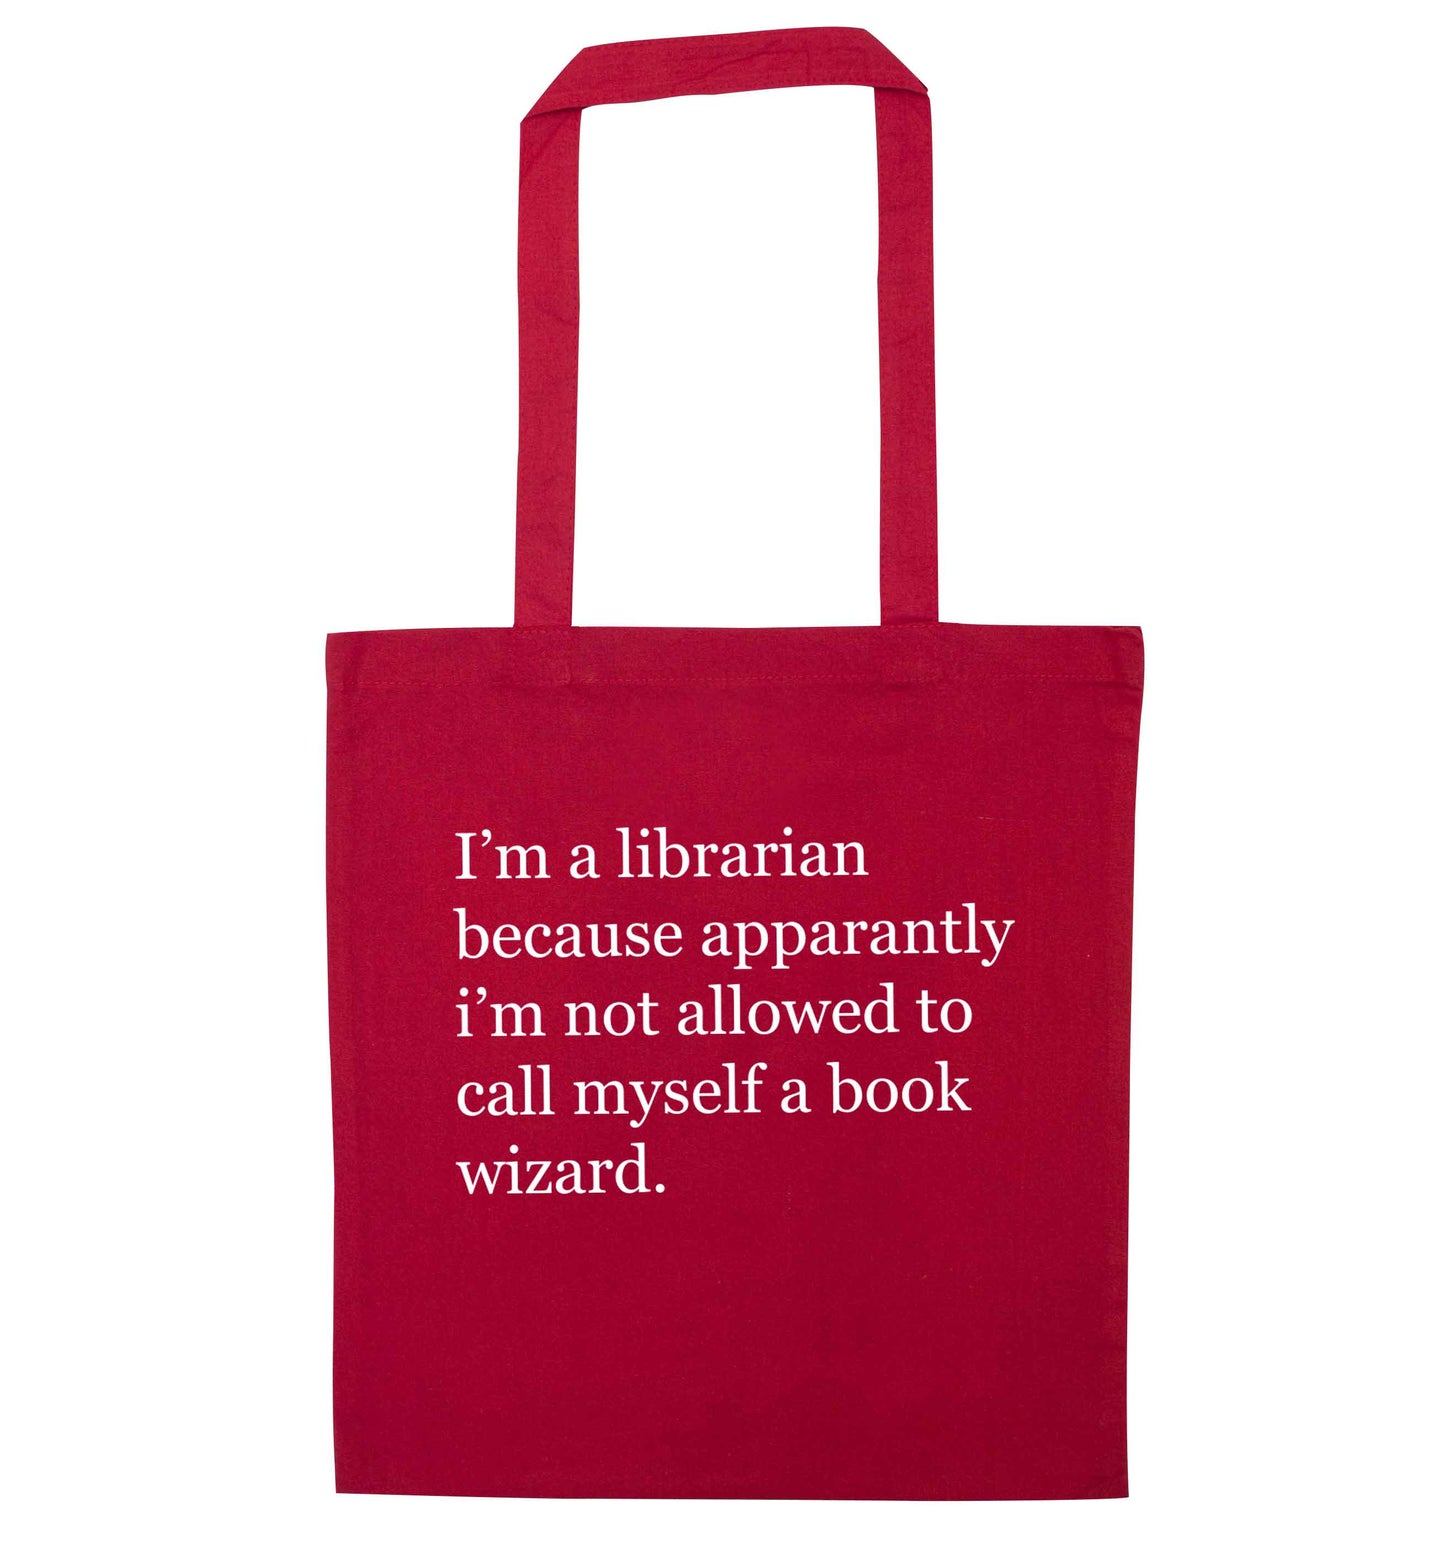 iÕm a librarian because apparantly iÕm not allowed to call myself a book wizard red tote bag